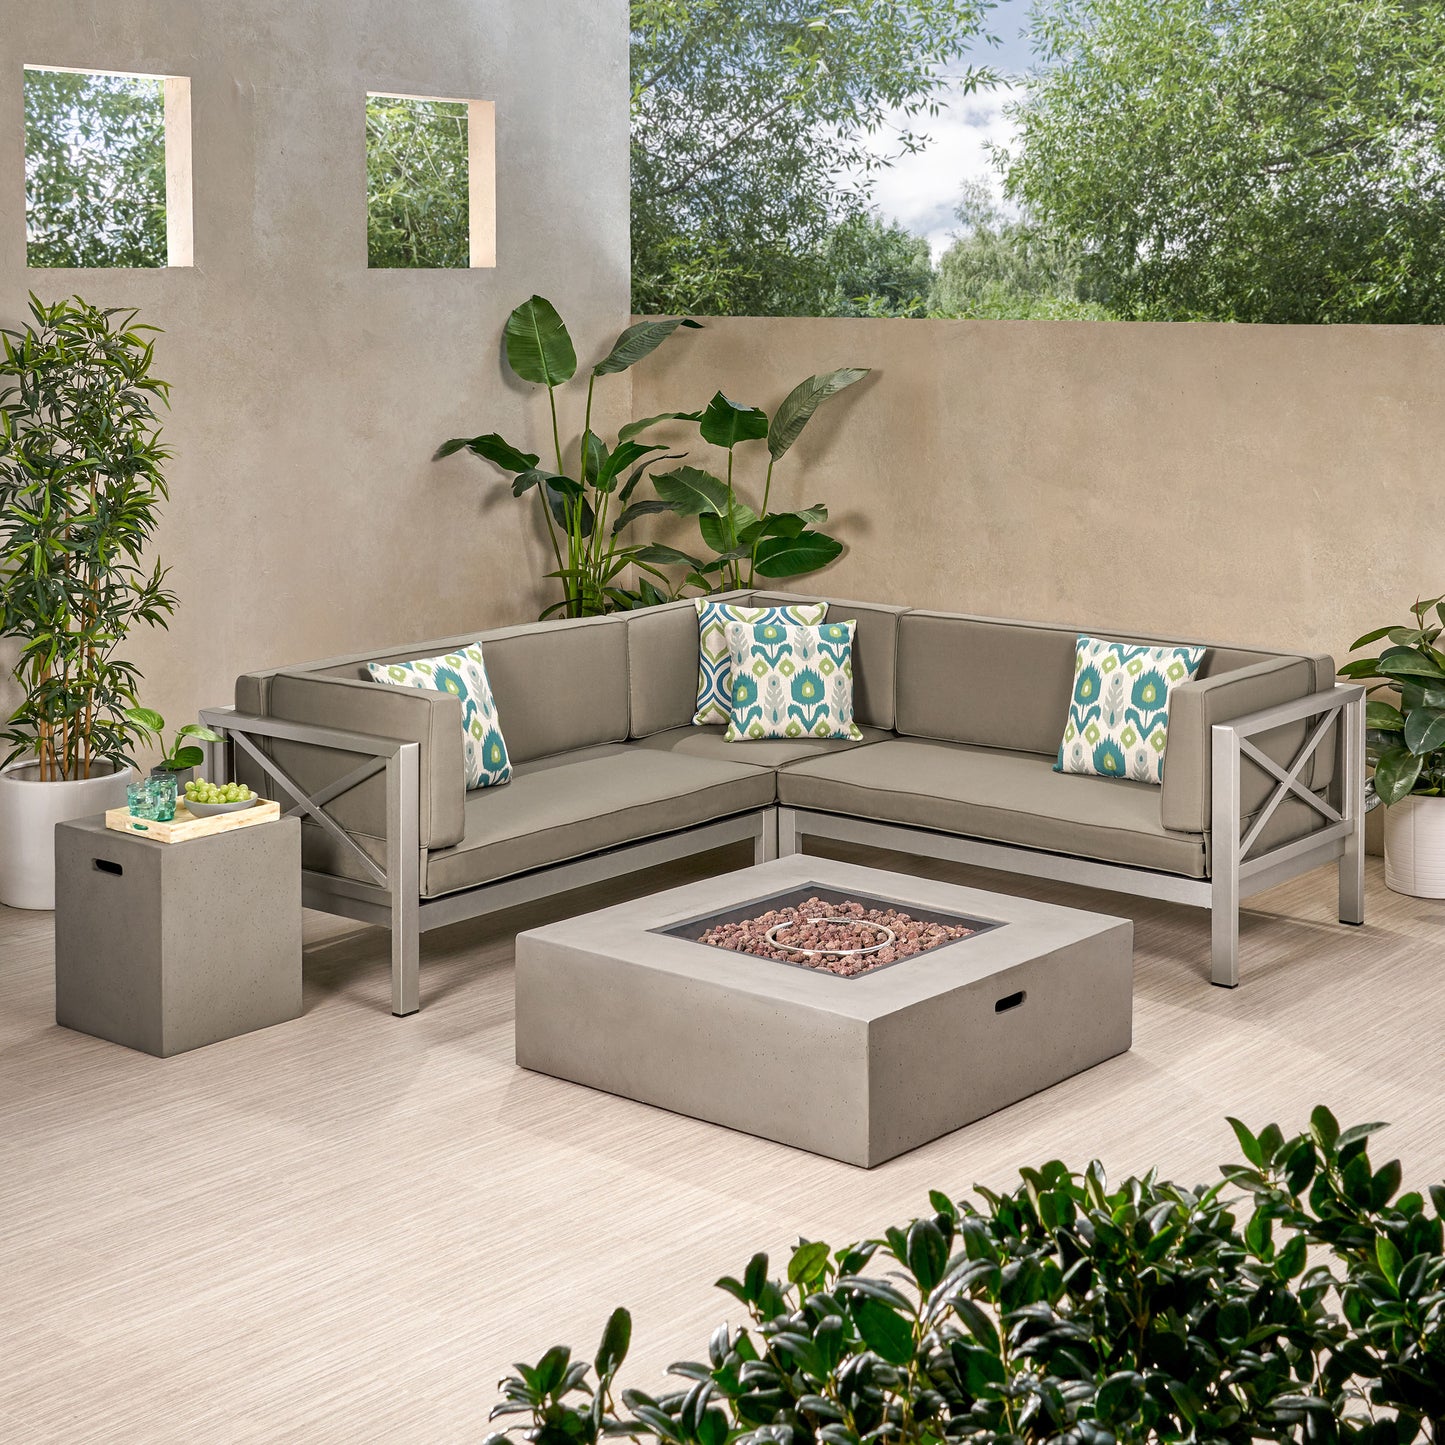 Morocco Vista Outdoor Modern 5 Seater V-Shaped Sectional Sofa Set with Fire Pit and Tank Holder